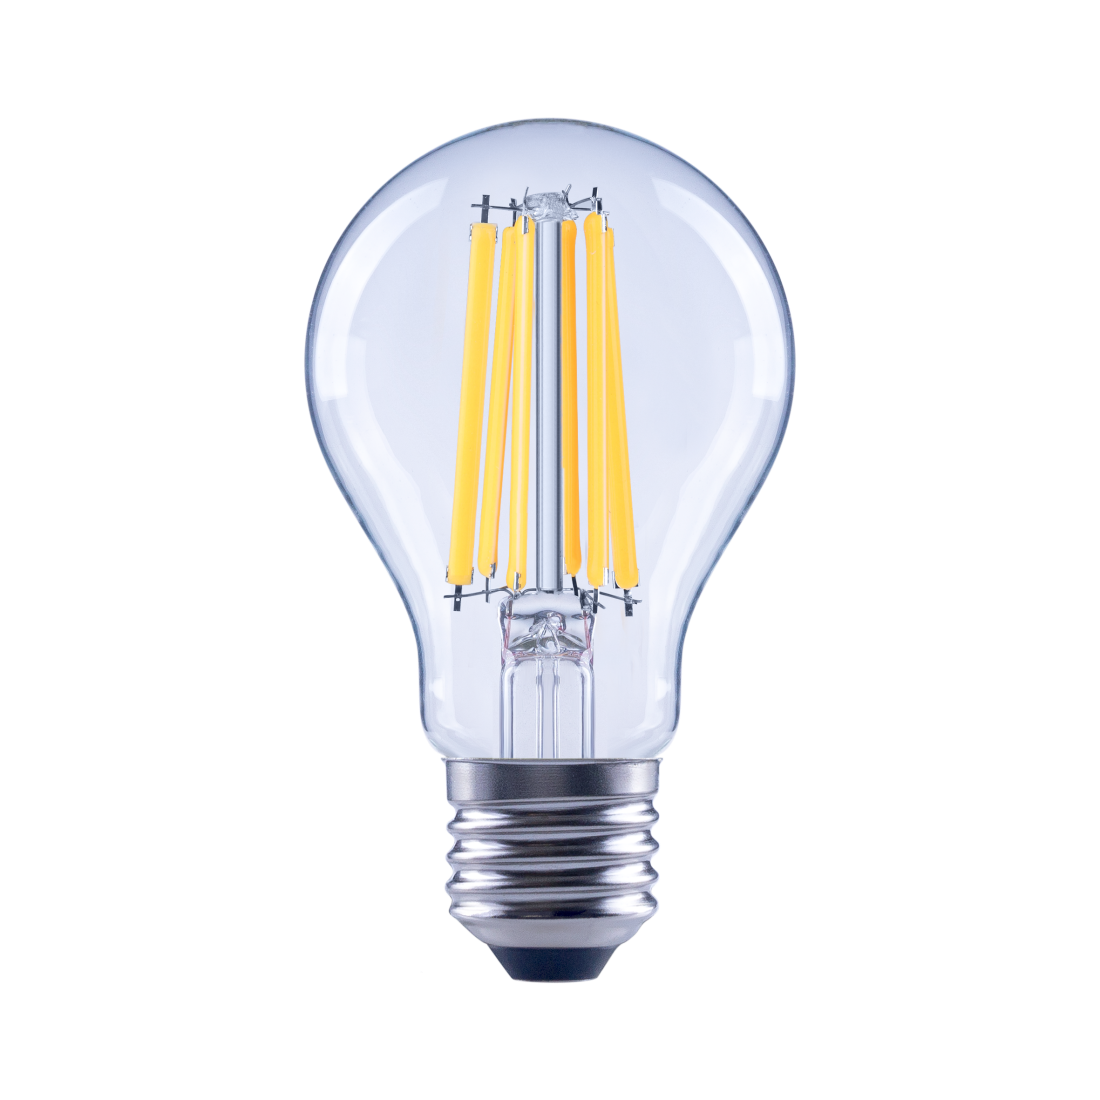 abx High-Res Image - Xavax, LED Filament, E27, 1521 lm Replaces 100W, Incand. Bulb, warm white, clear, Dimmable